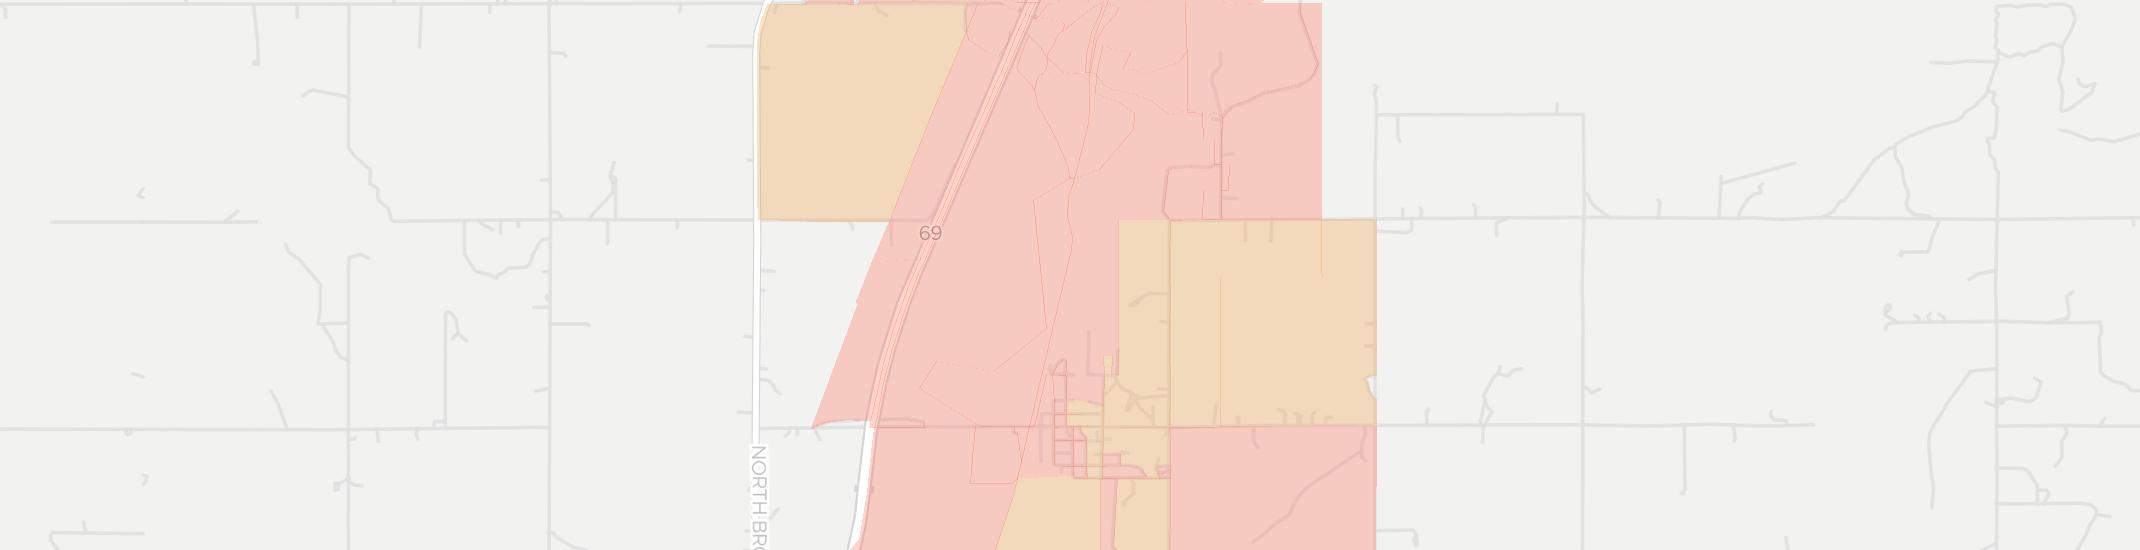 Rentiesville Internet Competition Map. Click for interactive map.